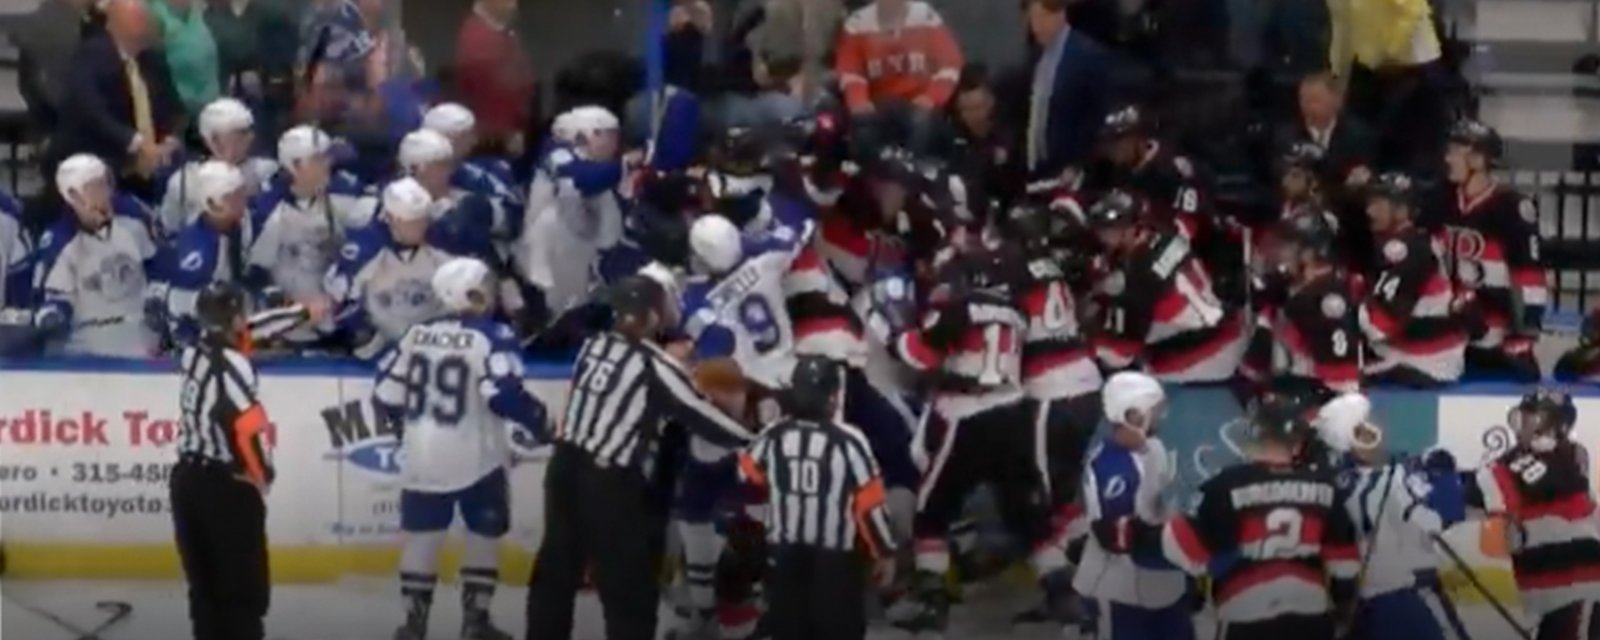 Must See: Ugly bench brawl in AHL game